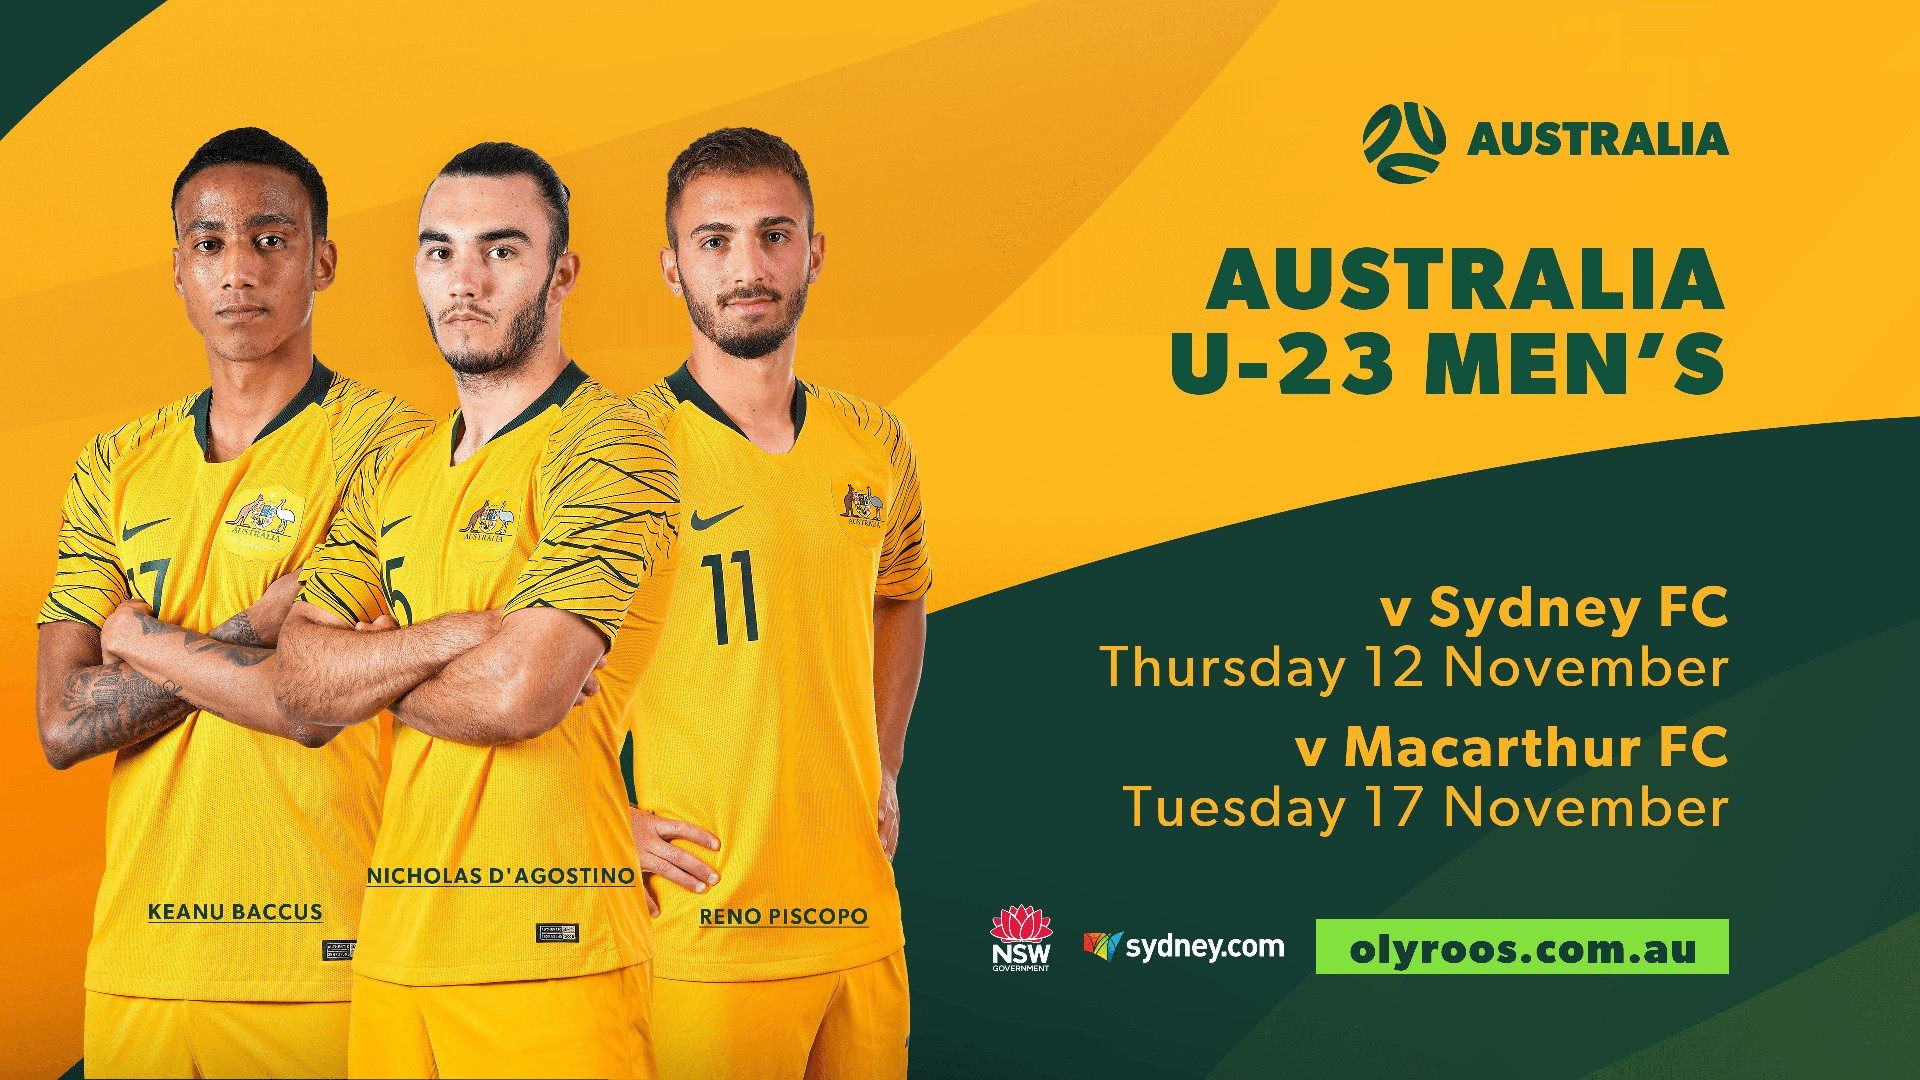 Australia under-23 men's team are scheduled to play two friendlies during a training camp for Tokyo 2020 ©FFA